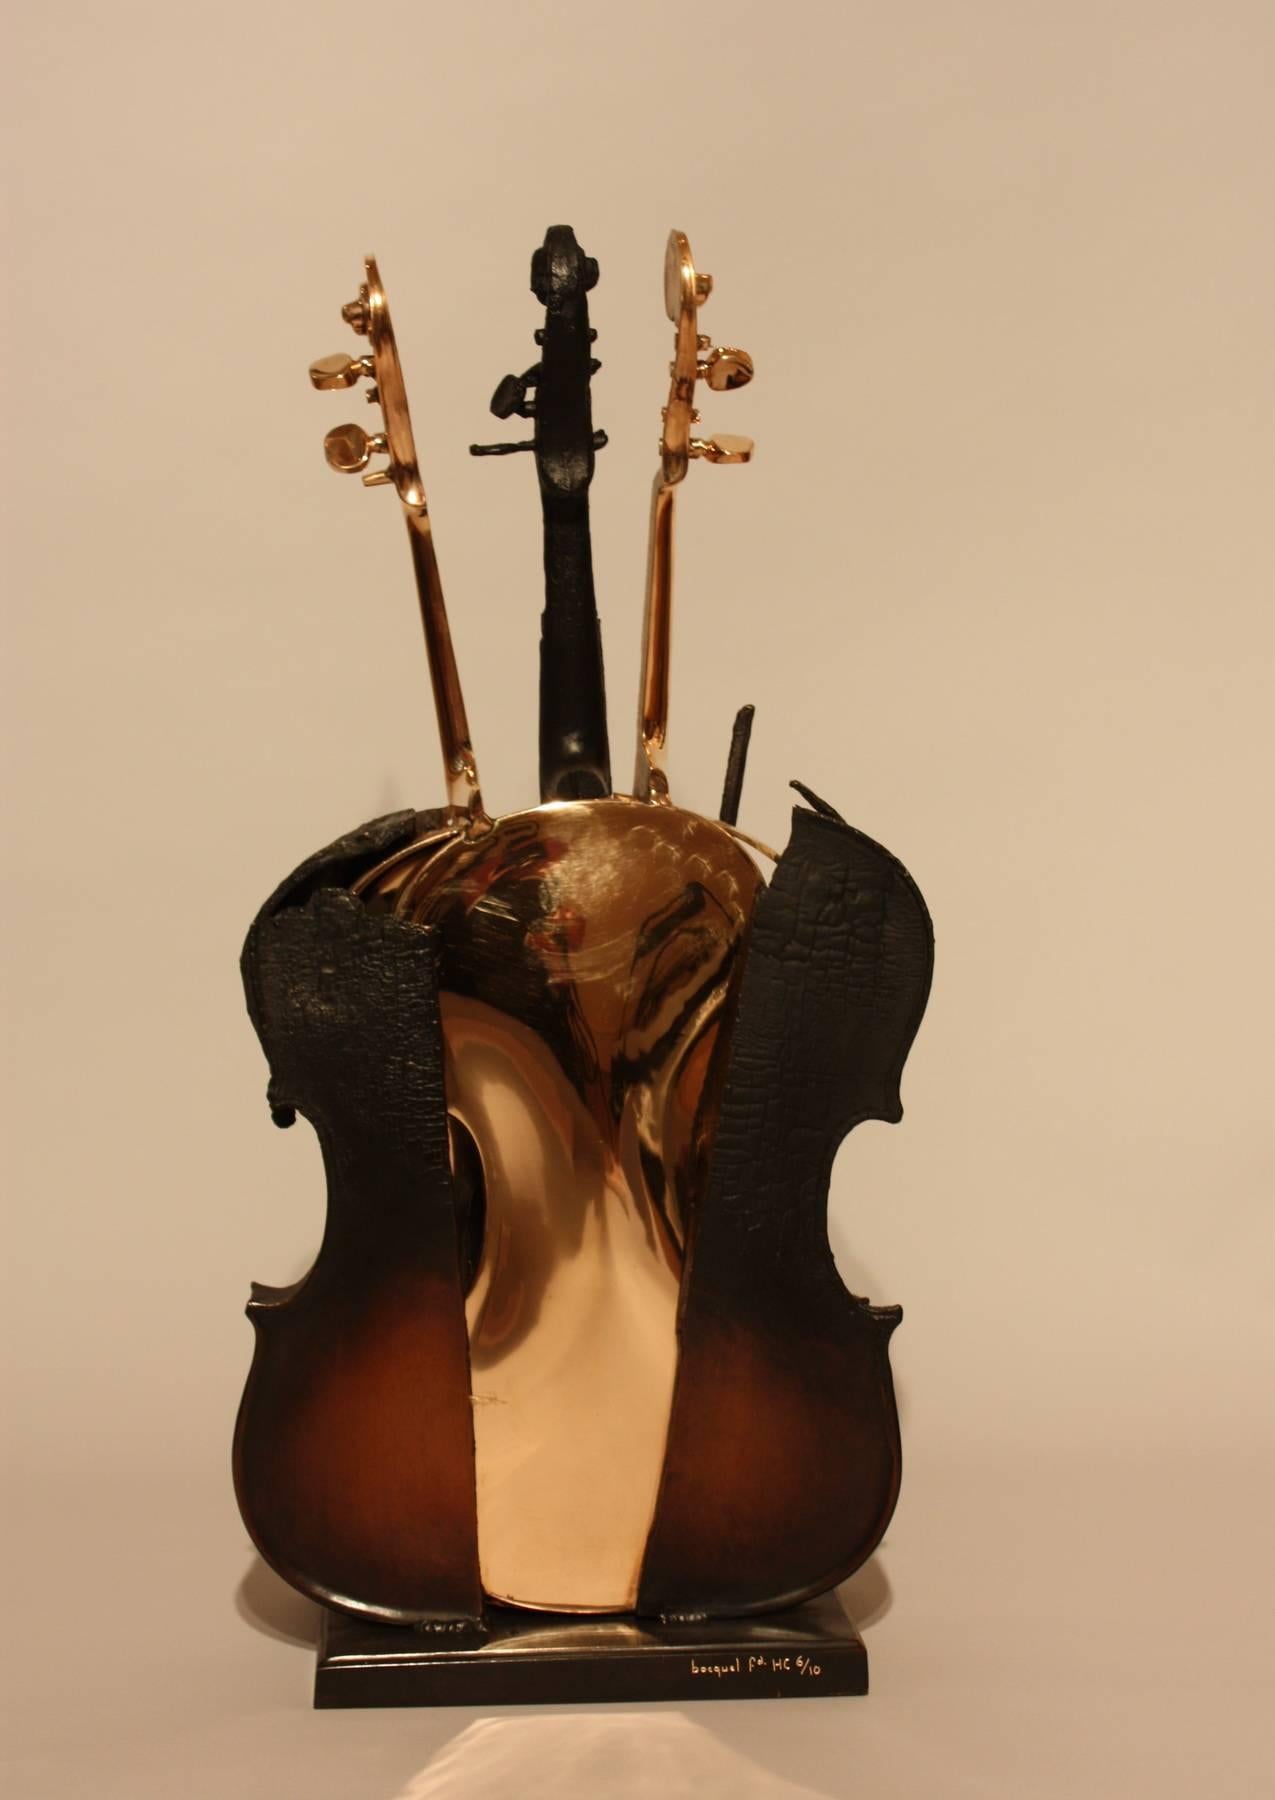 
Arman bronze violin "Fenice."
Model in created in 2004.
Edition of 100 + 20 AP + 10 HC + 30 copies I/XXX to XXX/XXX.
With the stamp of foundry Bocquel.
Signed "Arman" and numbered on the base.
This work is registered in